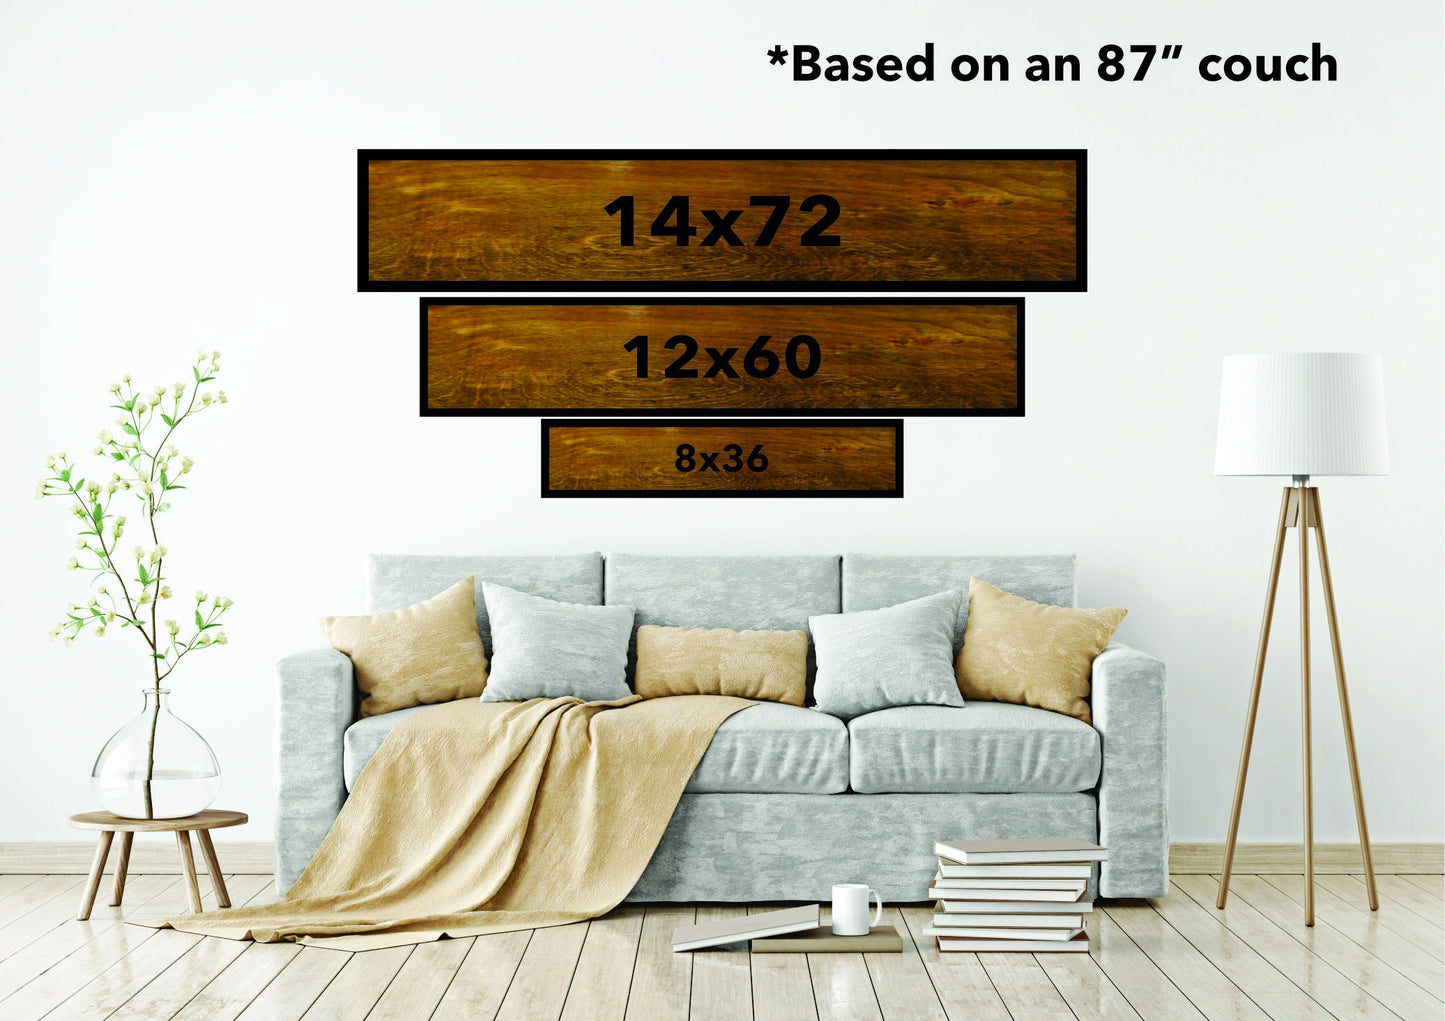 Inspiring Handmade Wall Decor Show The World Whats Possible Large Couch Sign Family Room Mantel Rustic Minimalist Farmhouse Simple 3D Phrase